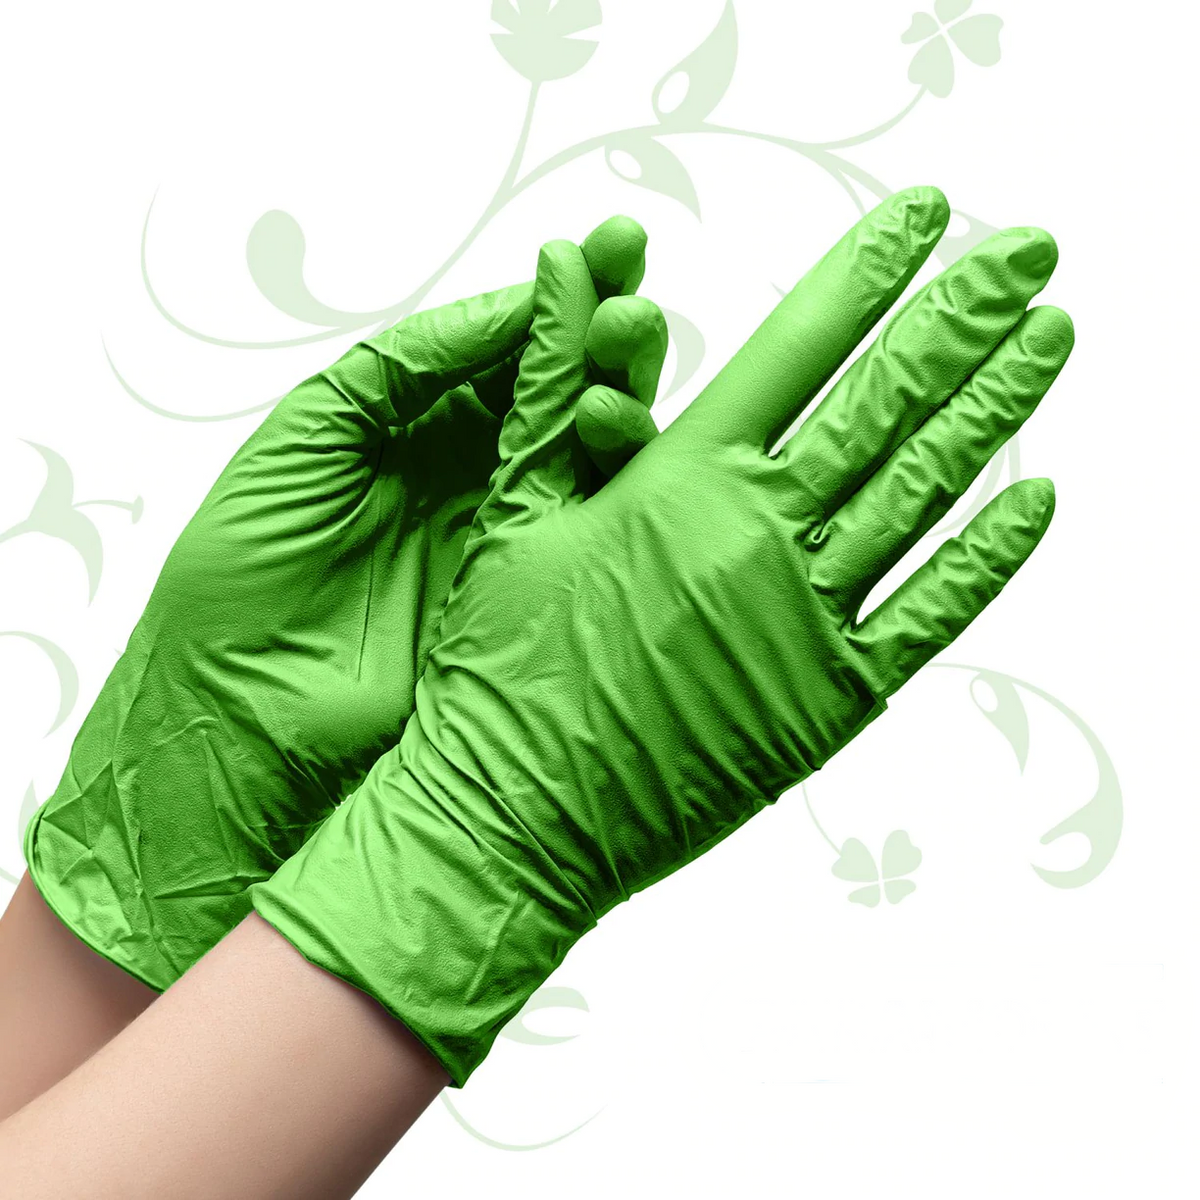 Wearing green gloves in the hands